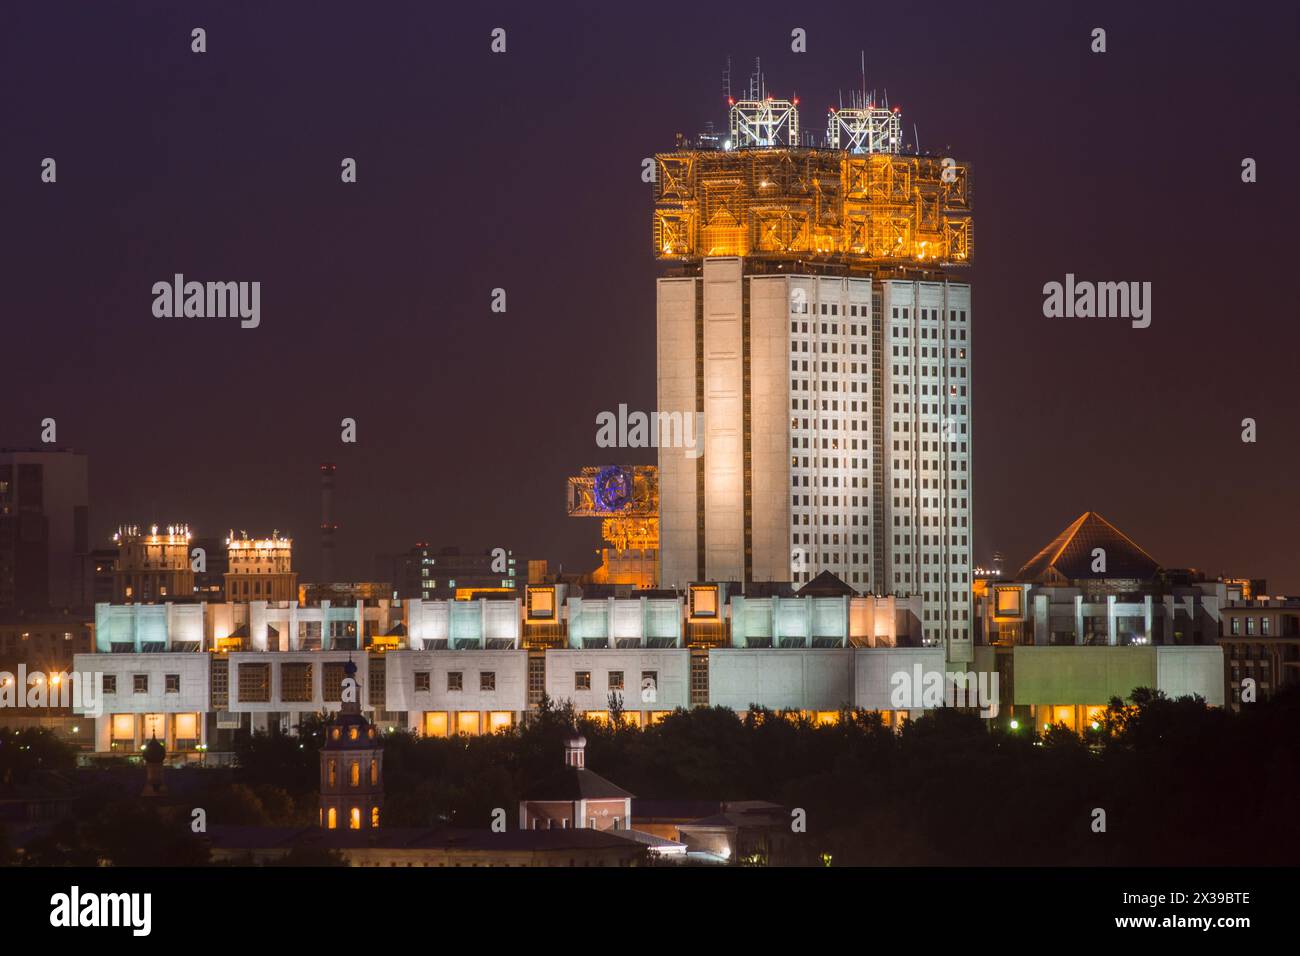 MOSCOW, RUSSIA - JUNE 6, 2014: Building of Presidium of Russian Academy of Sciences at evening in Moscow. I have only one version of the photo with sh Stock Photo